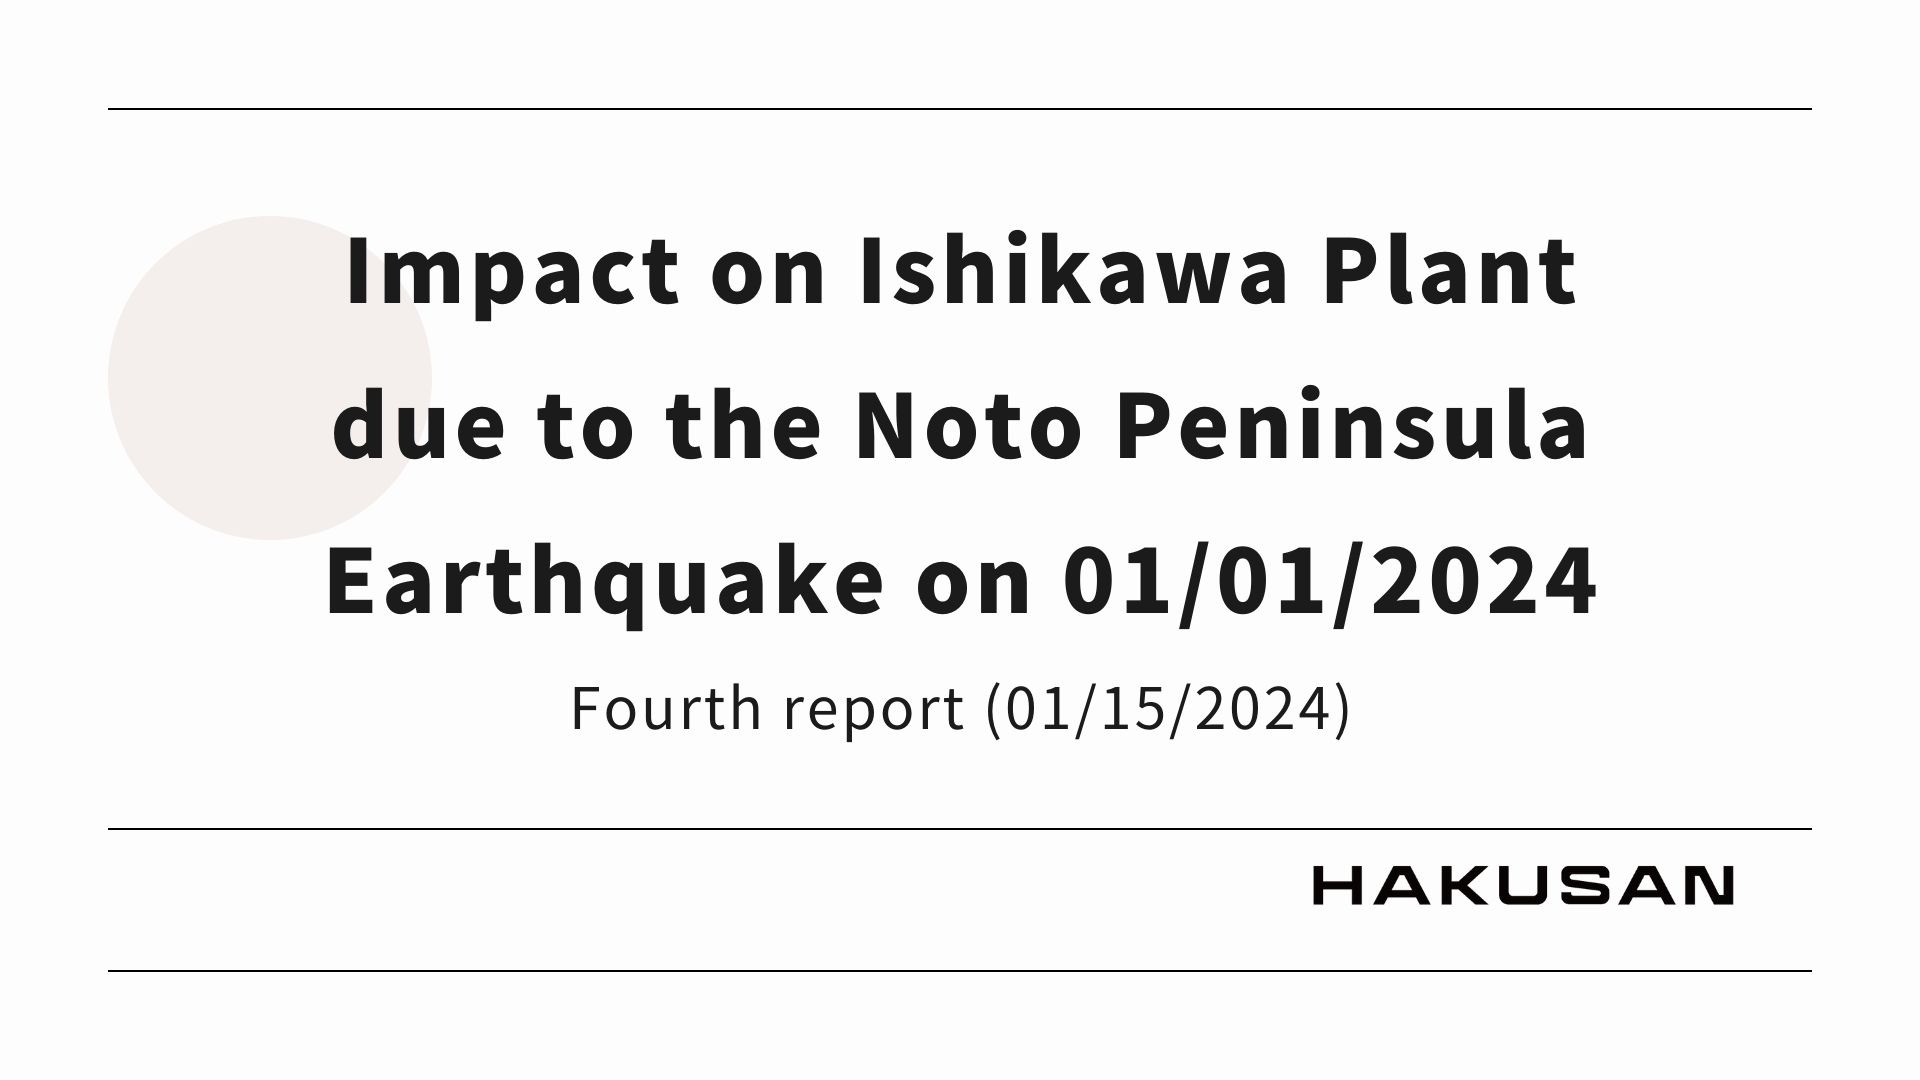 The impact of the 2024 Noto Peninsula Earthquake on the Ishikawa factory (Fourth report_as of January 15, 2024)